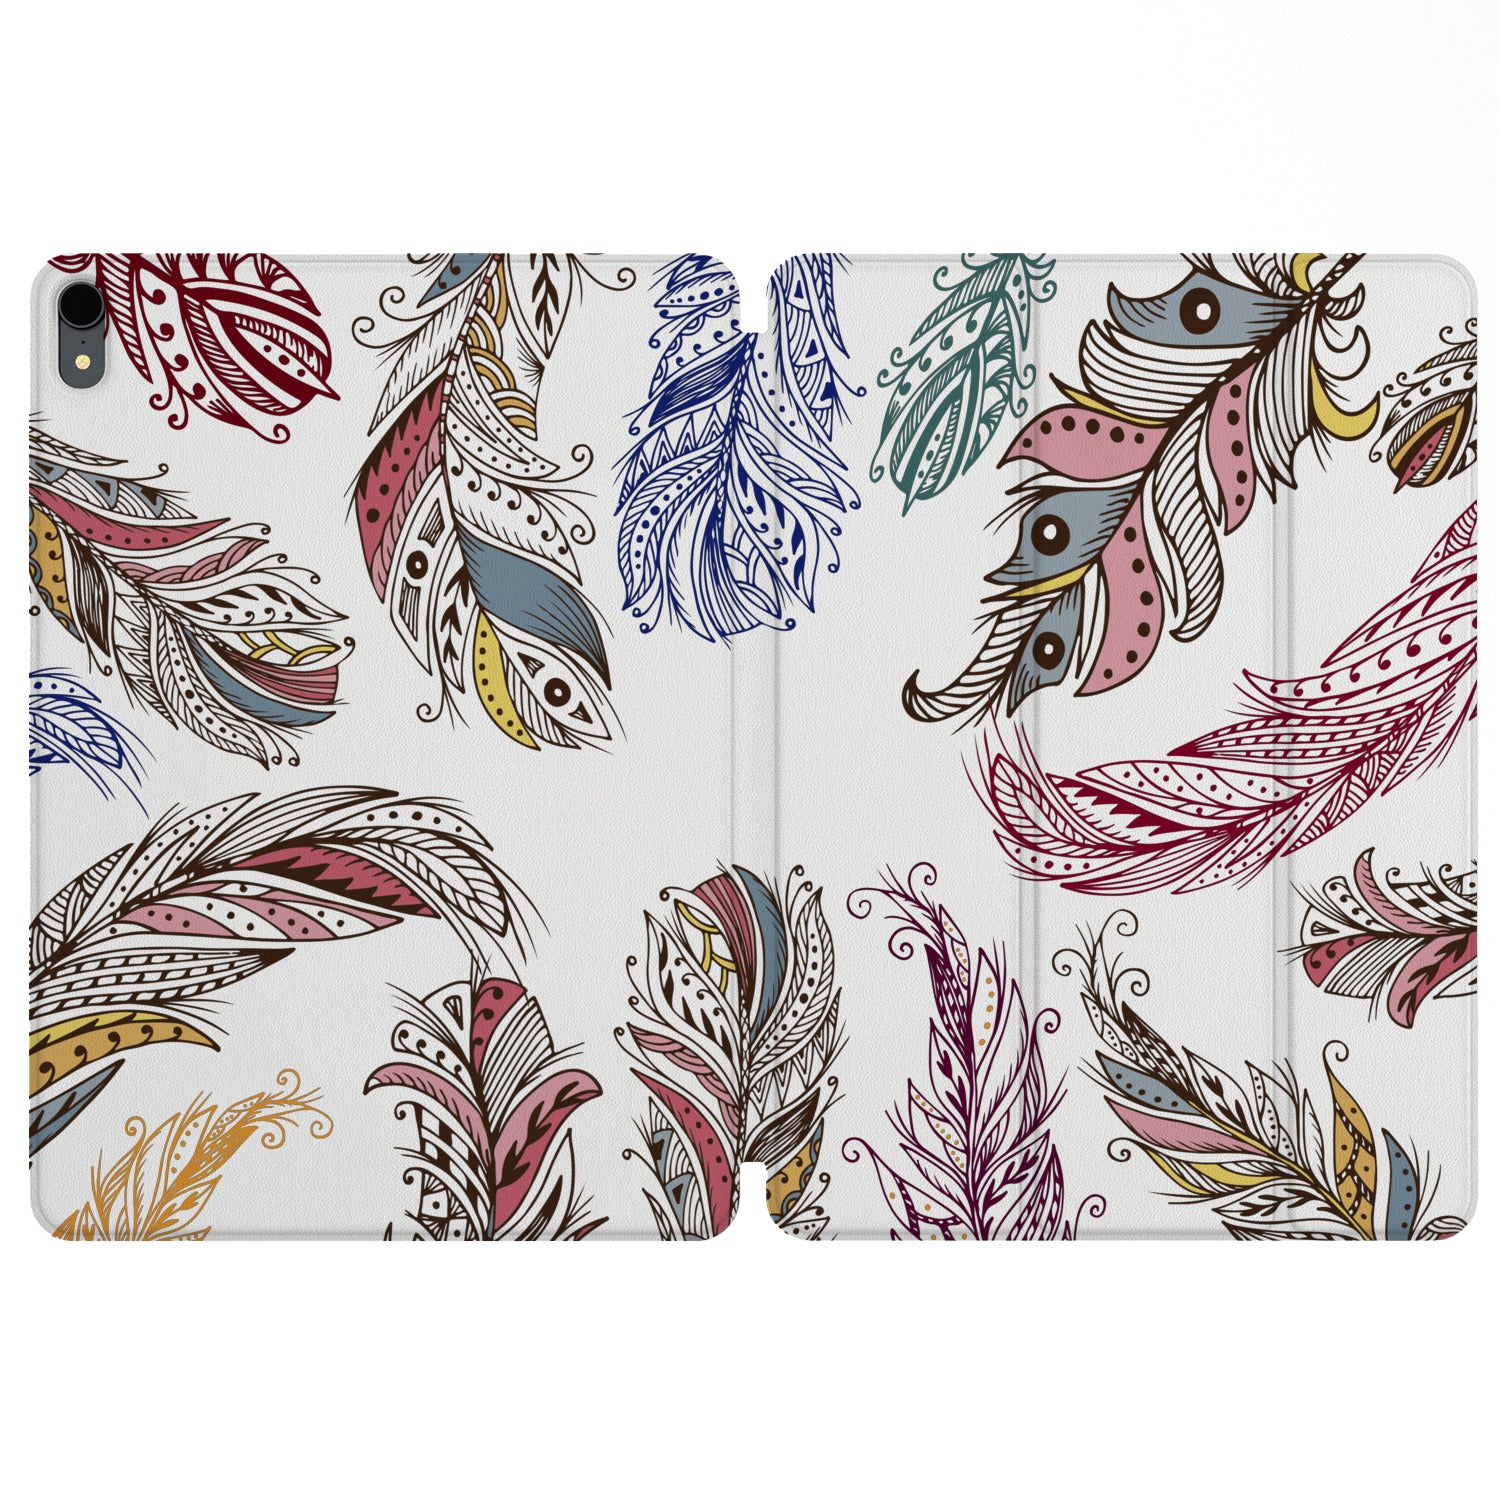 Lex Altern Magnetic iPad Case Amazing Feathers for your Apple tablet.